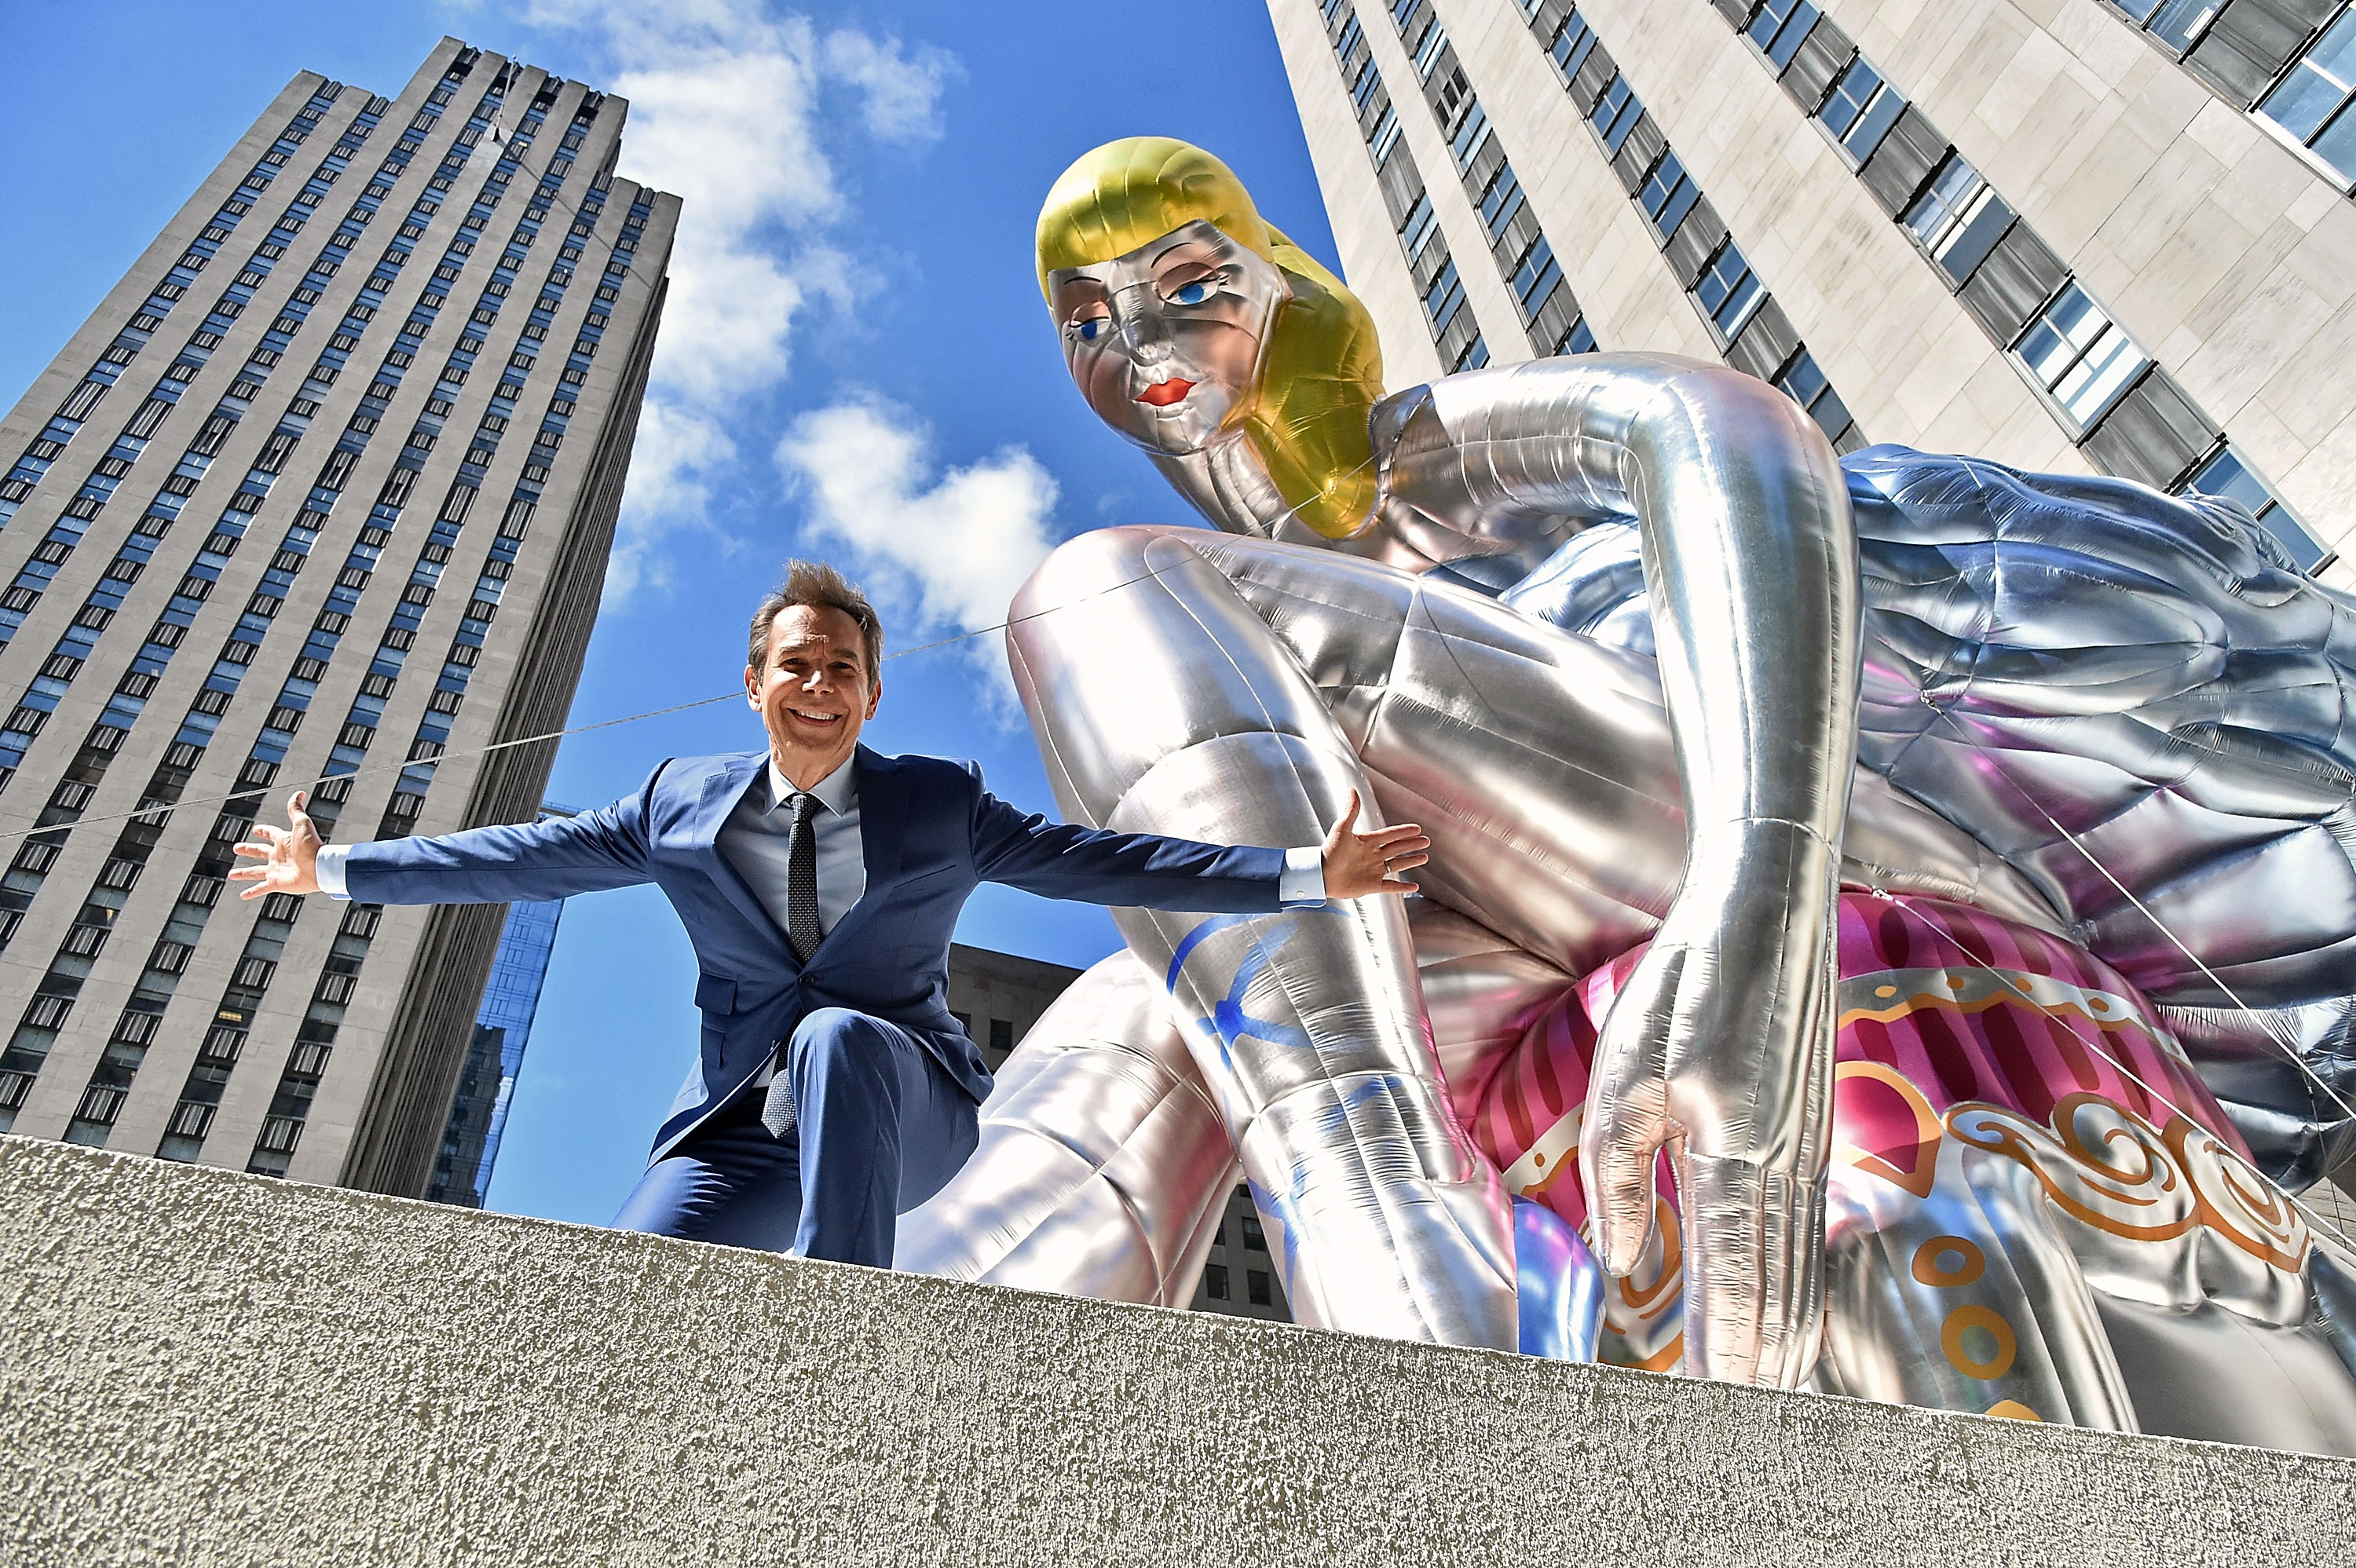 Jeff Koons with Seated Ballerina, a public art project at the Rockefeller Center in New York City.